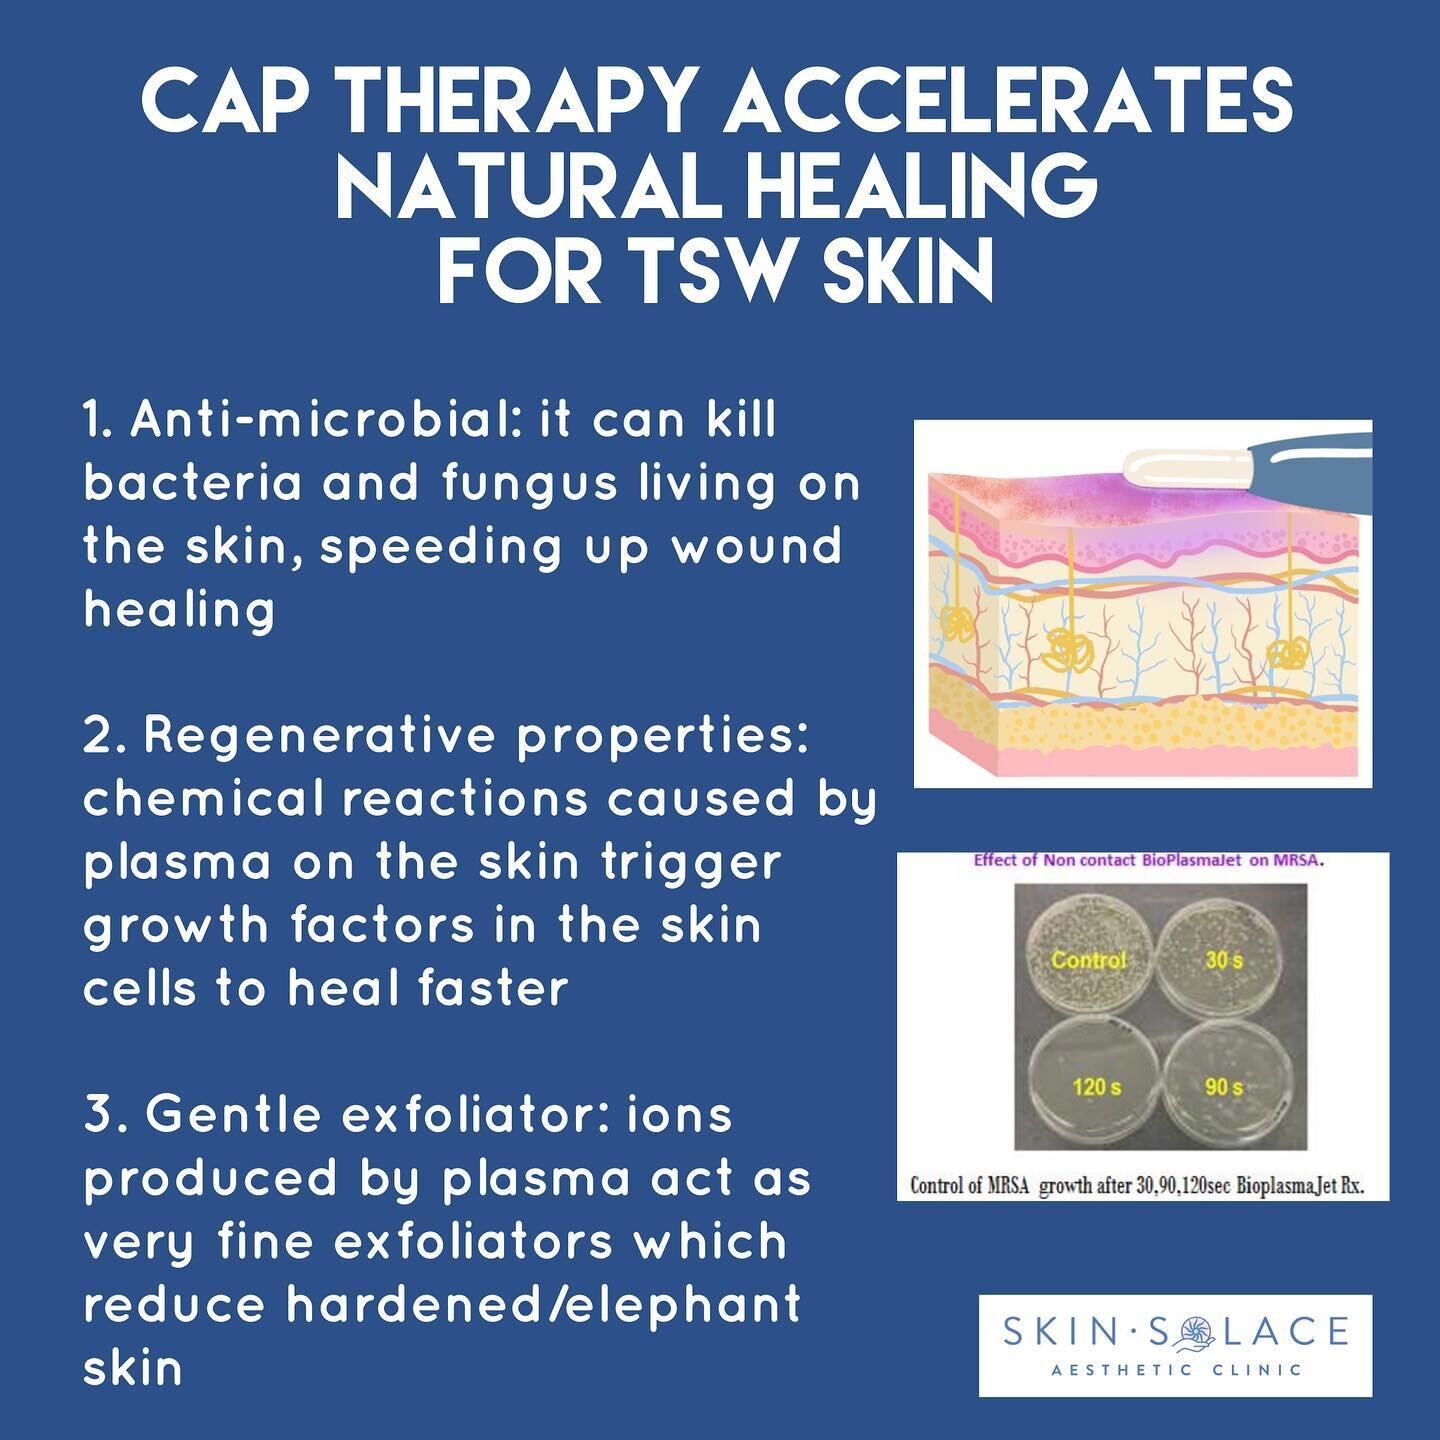 ⚡️ The benefits of our Ultra Pulse Contact CAP for TSW skin ⚡️